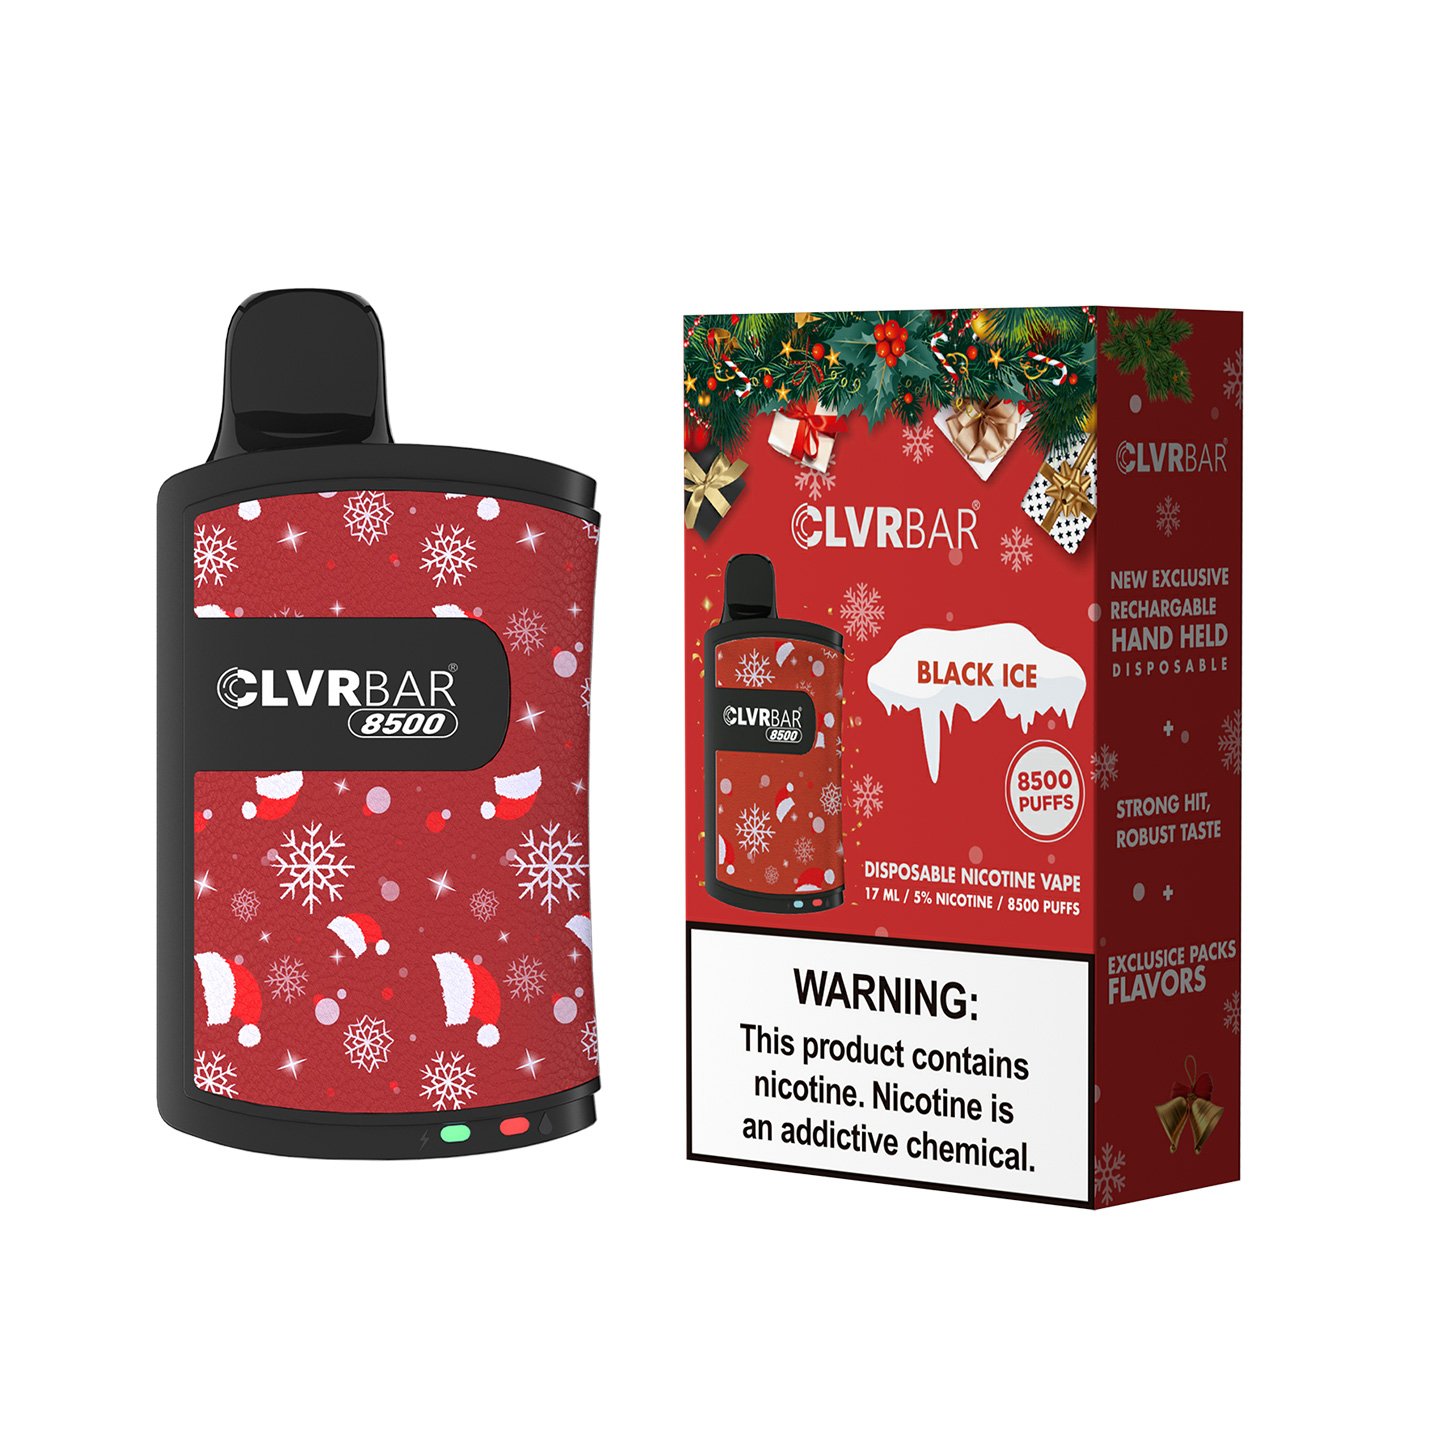 CLVRBAR disposable device 8500 Puffs- Black Ice(CHRISTMAS EDITION)